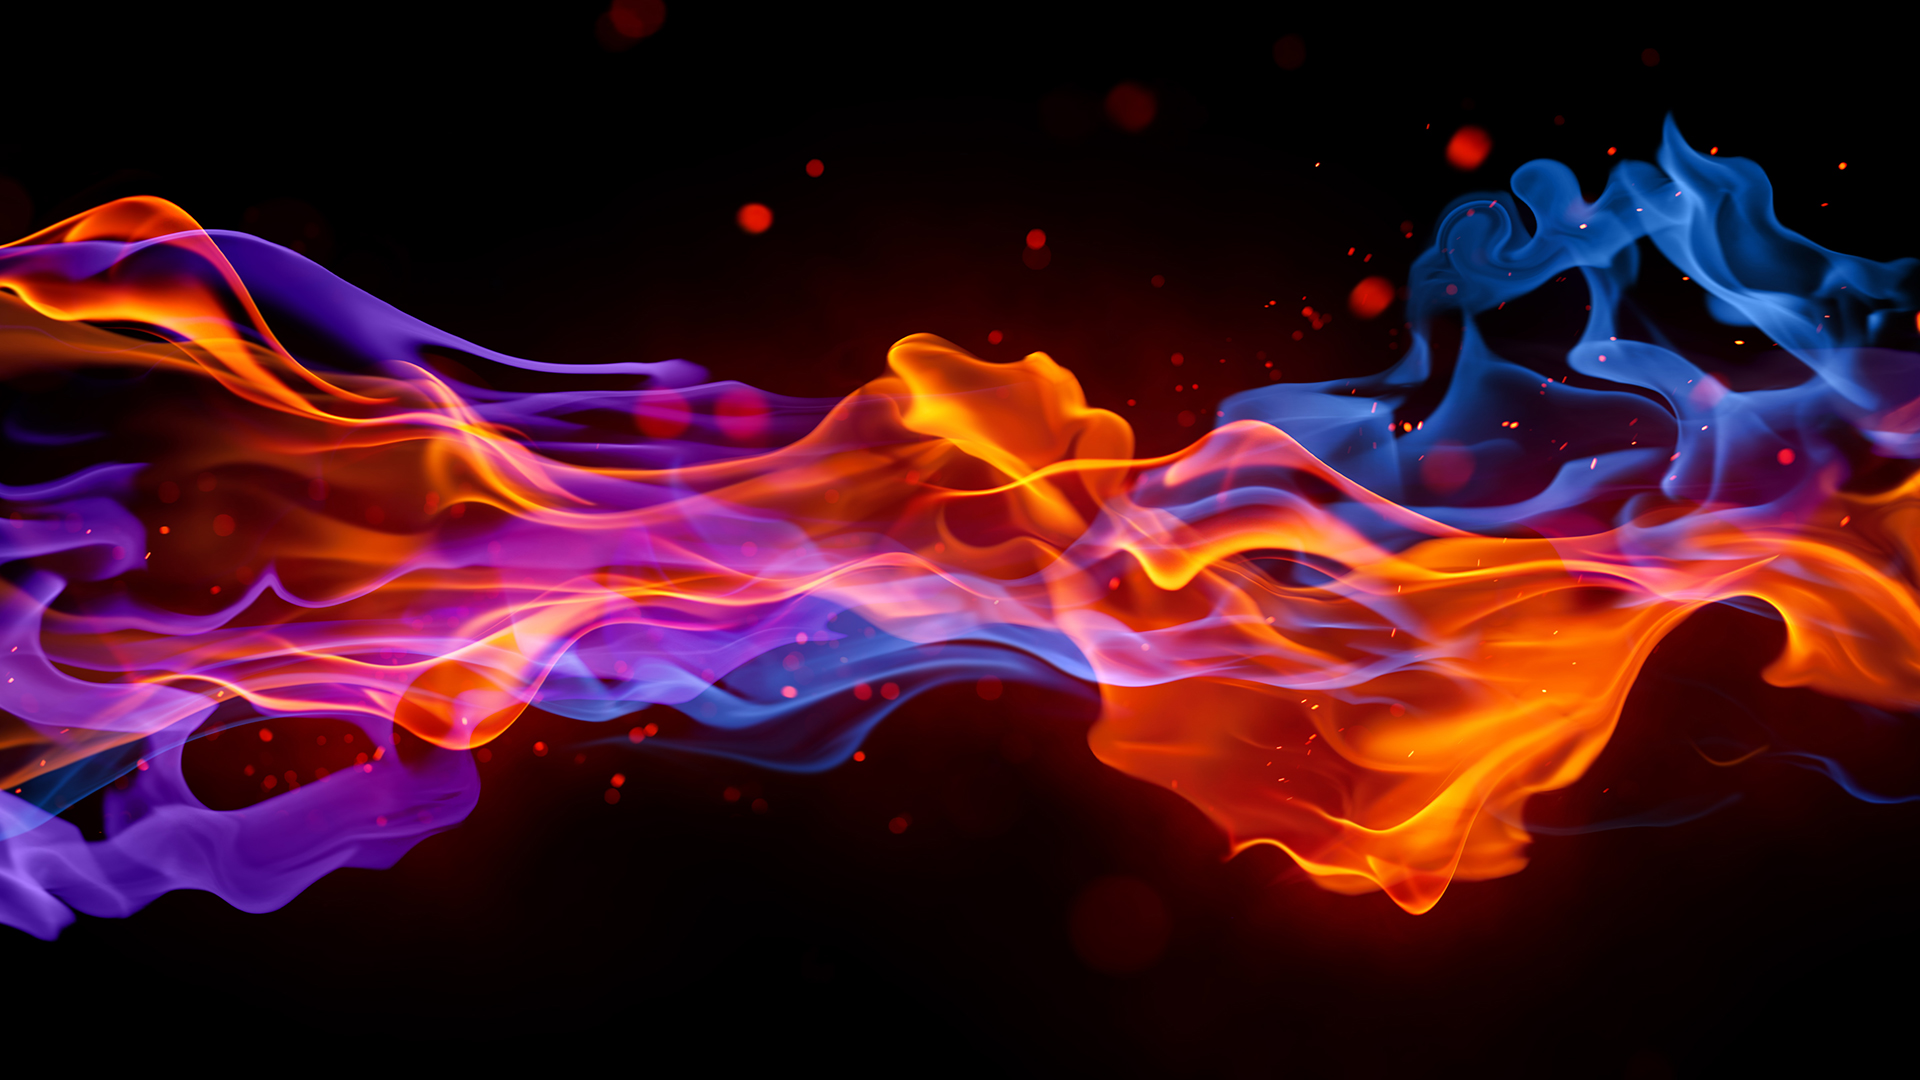 Blue-And-Red-Fire-Wallpaper-Picture-187 (1).jpg